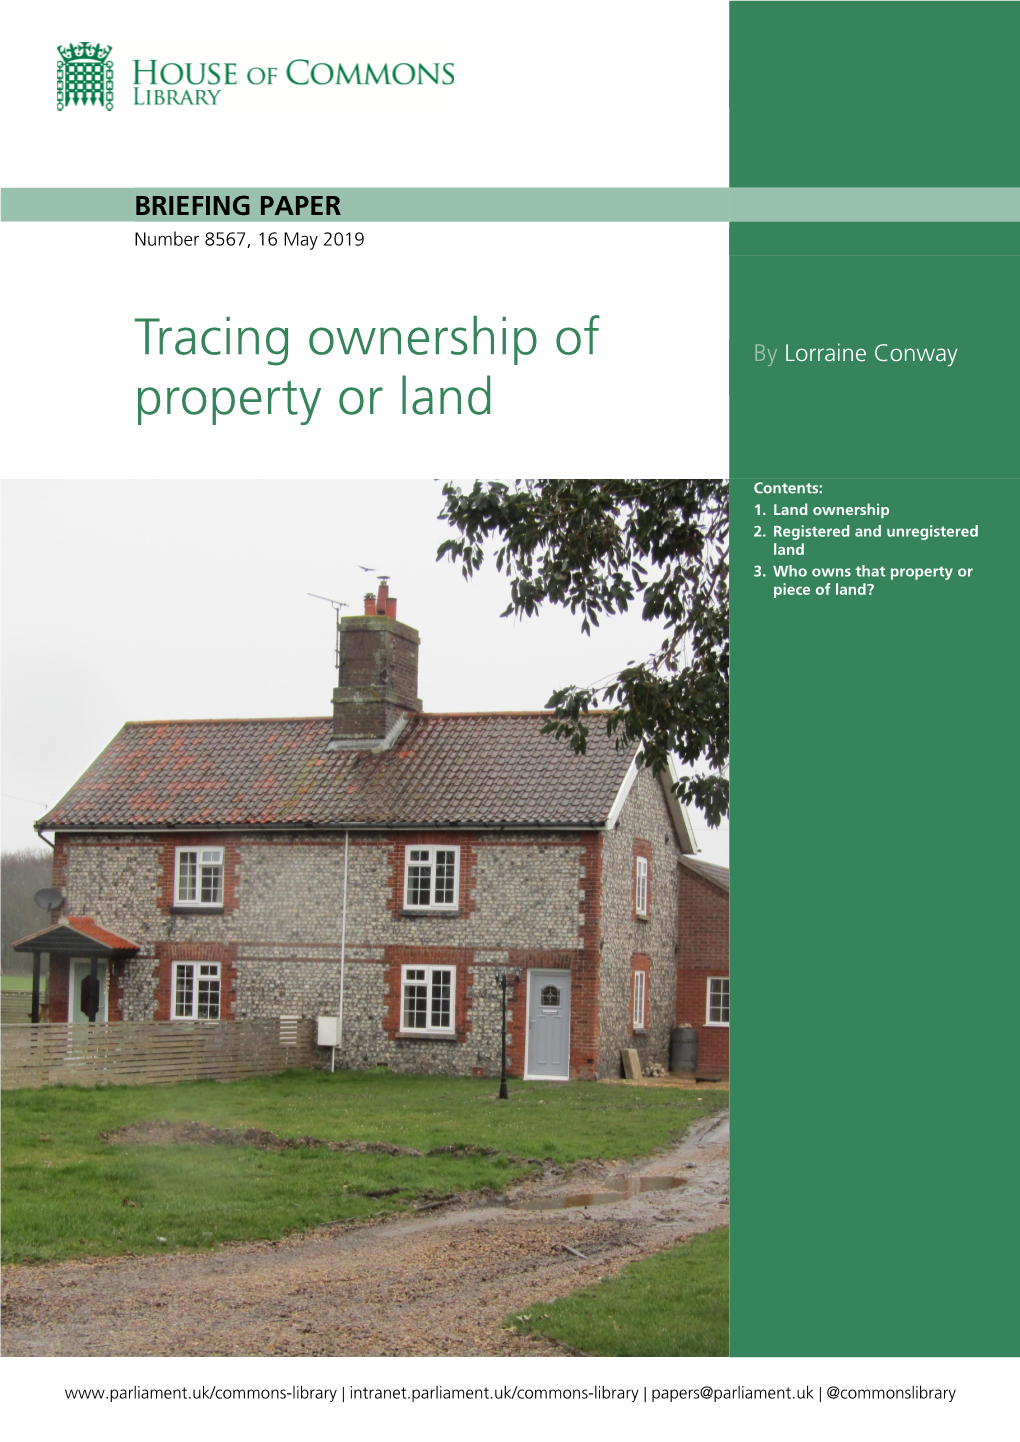 Tracing Ownership of a Property Or Land